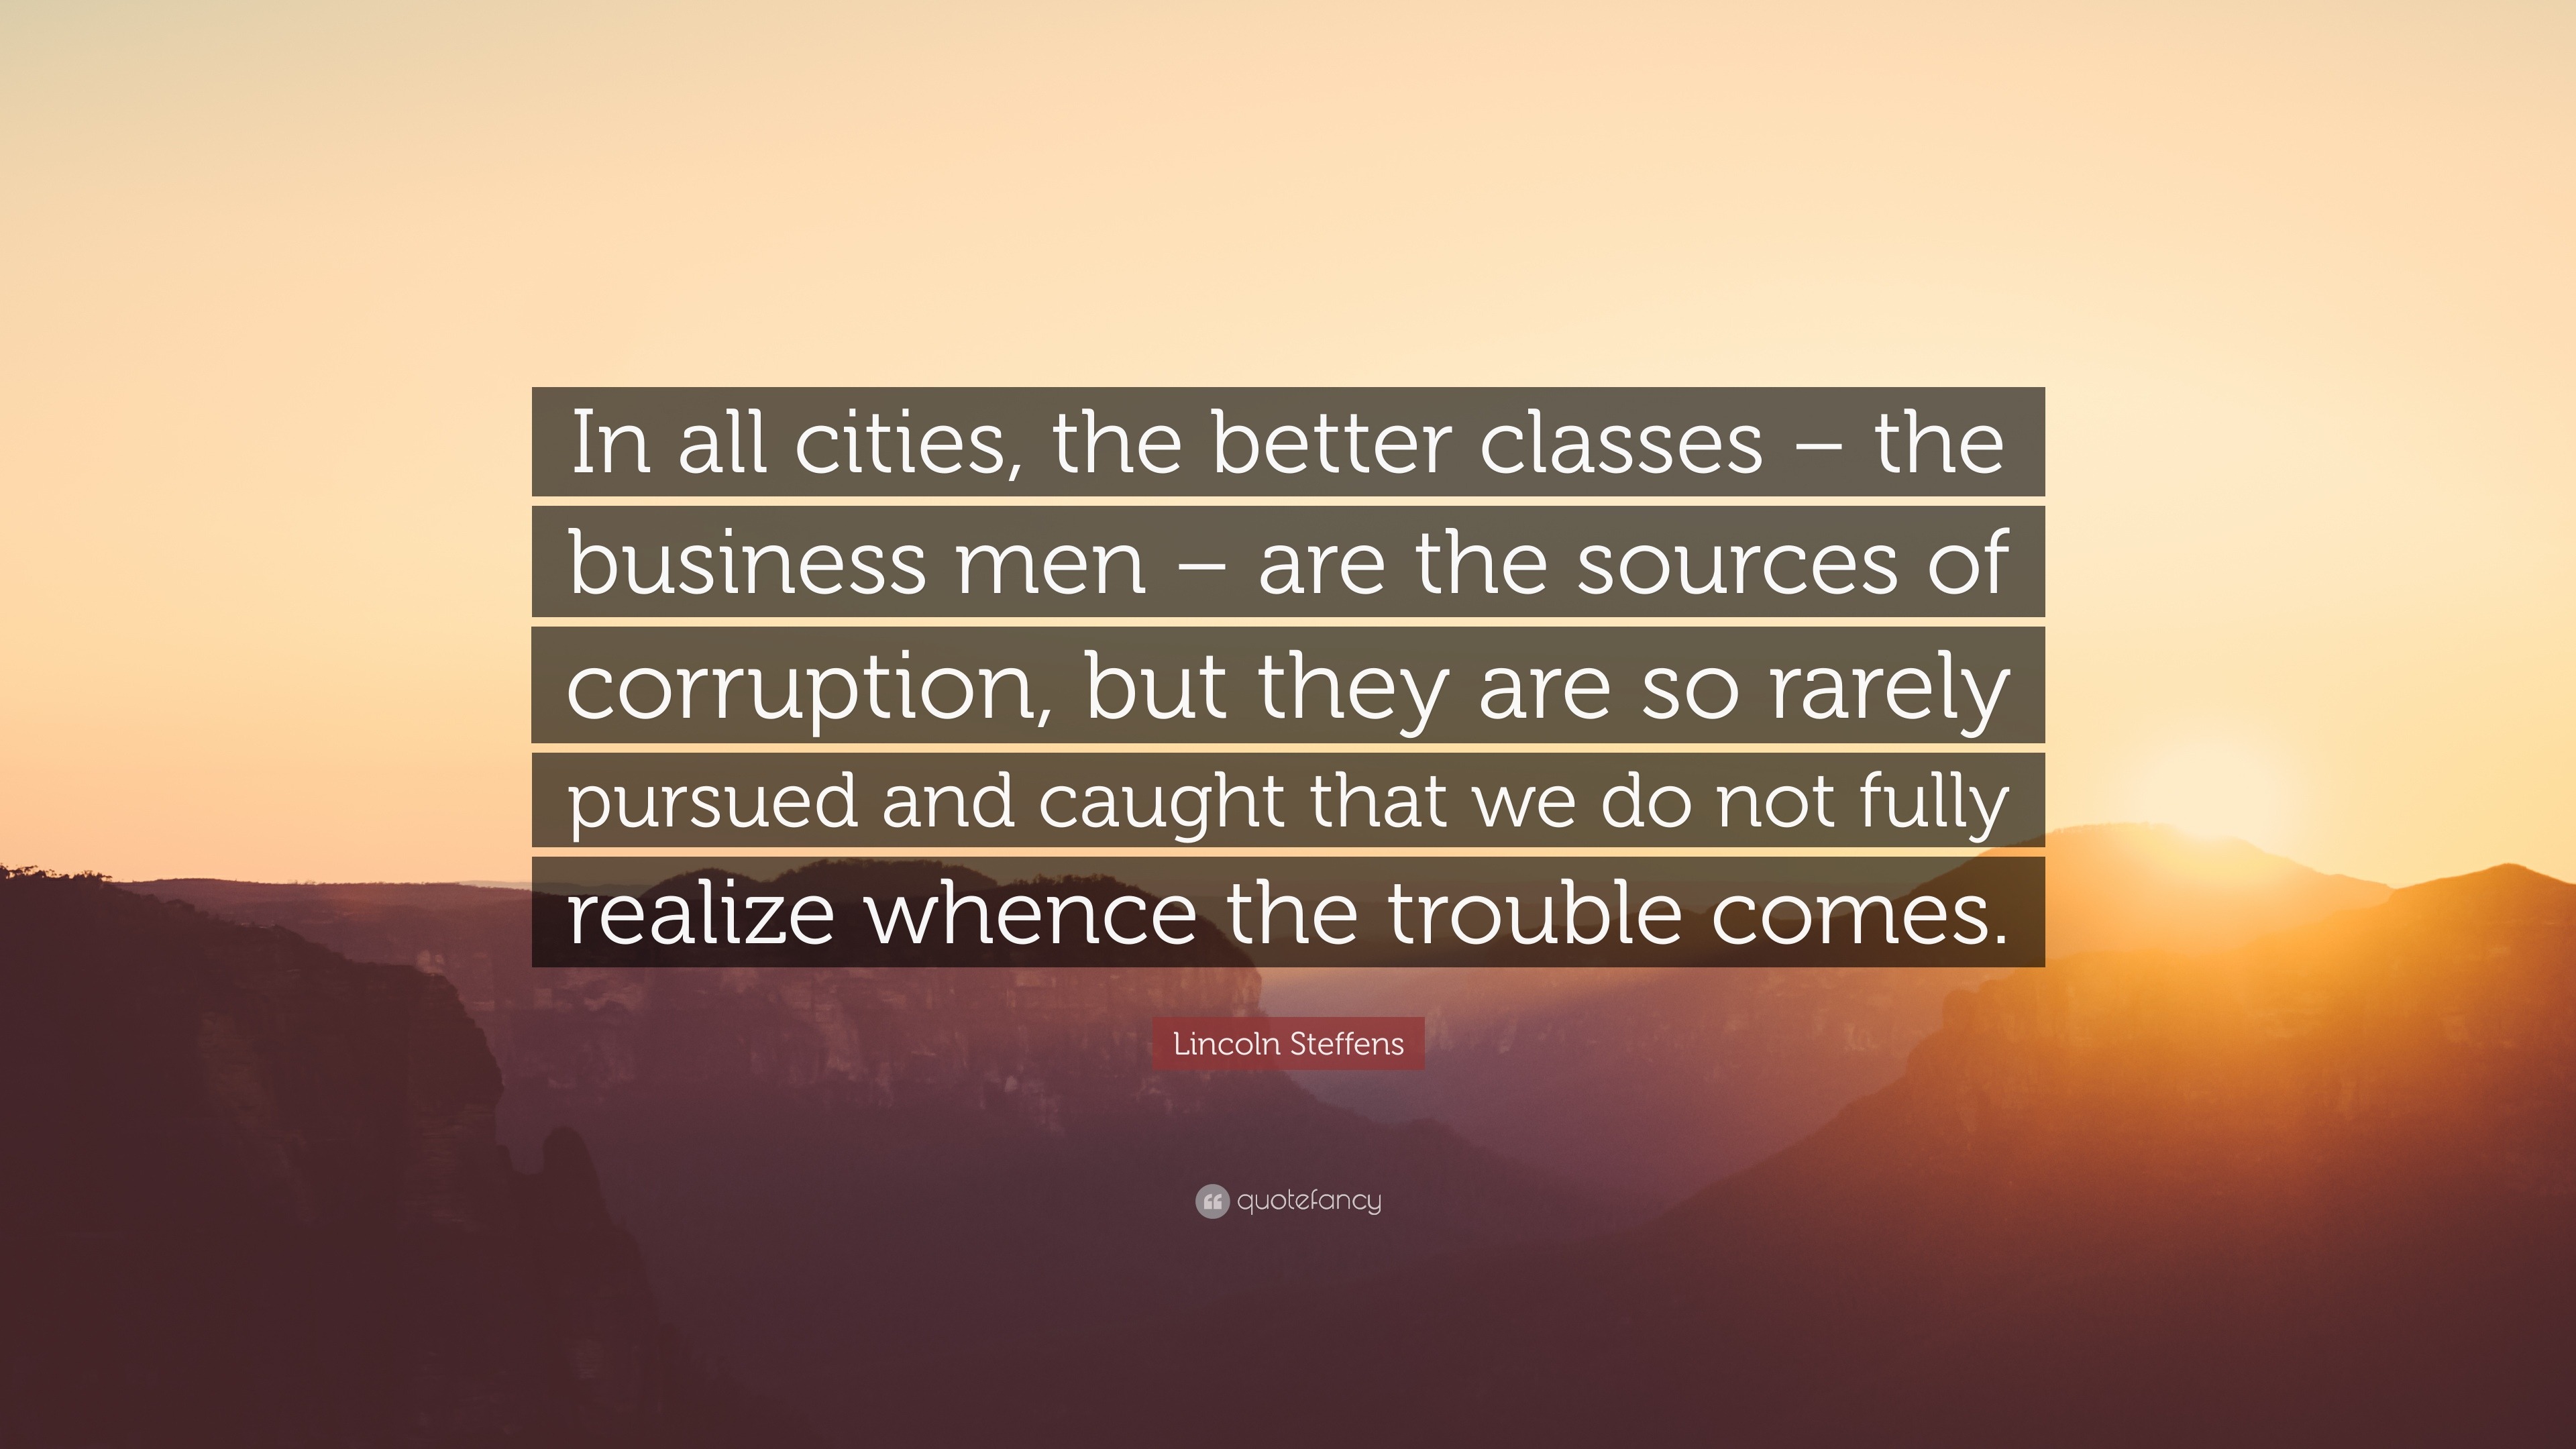 https://quotefancy.com/media/wallpaper/3840x2160/1105141-Lincoln-Steffens-Quote-In-all-cities-the-better-classes-the.jpg